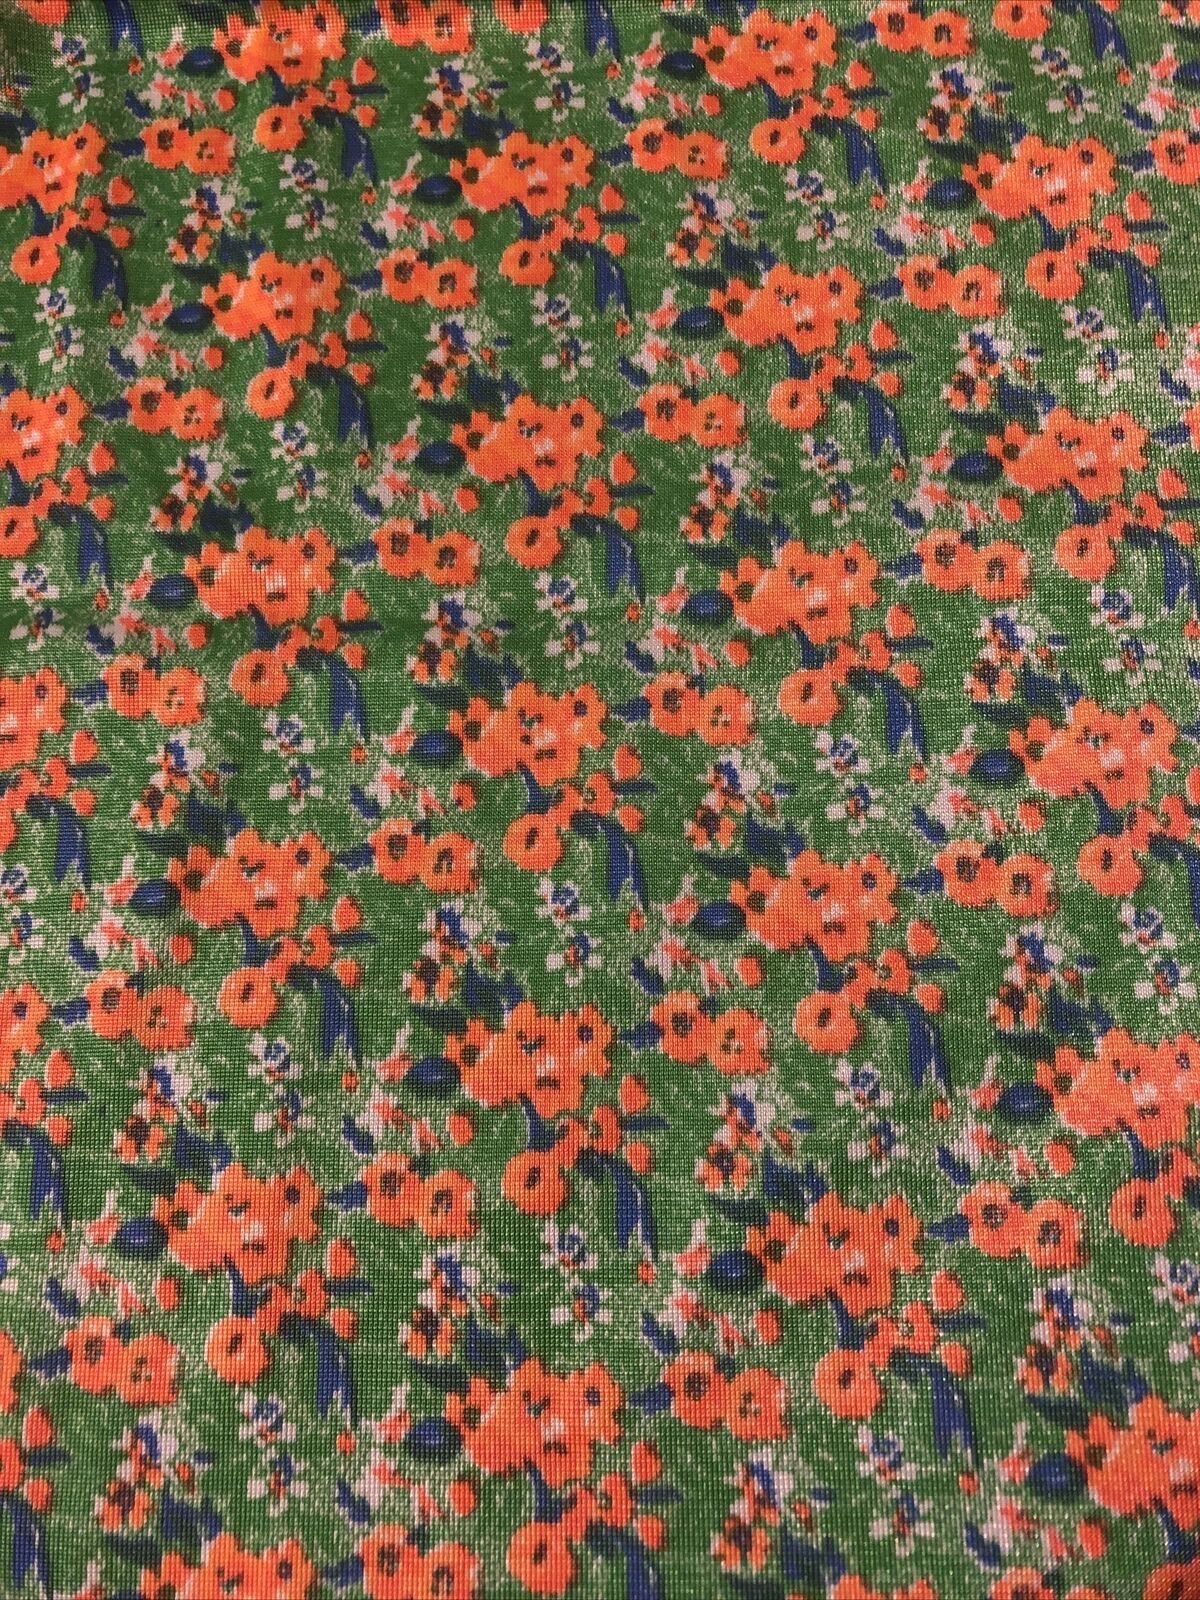 Vintage 1960s-70s Fabric Green Coral Floral 3 Yds Soft Polyester? Dress Skirt